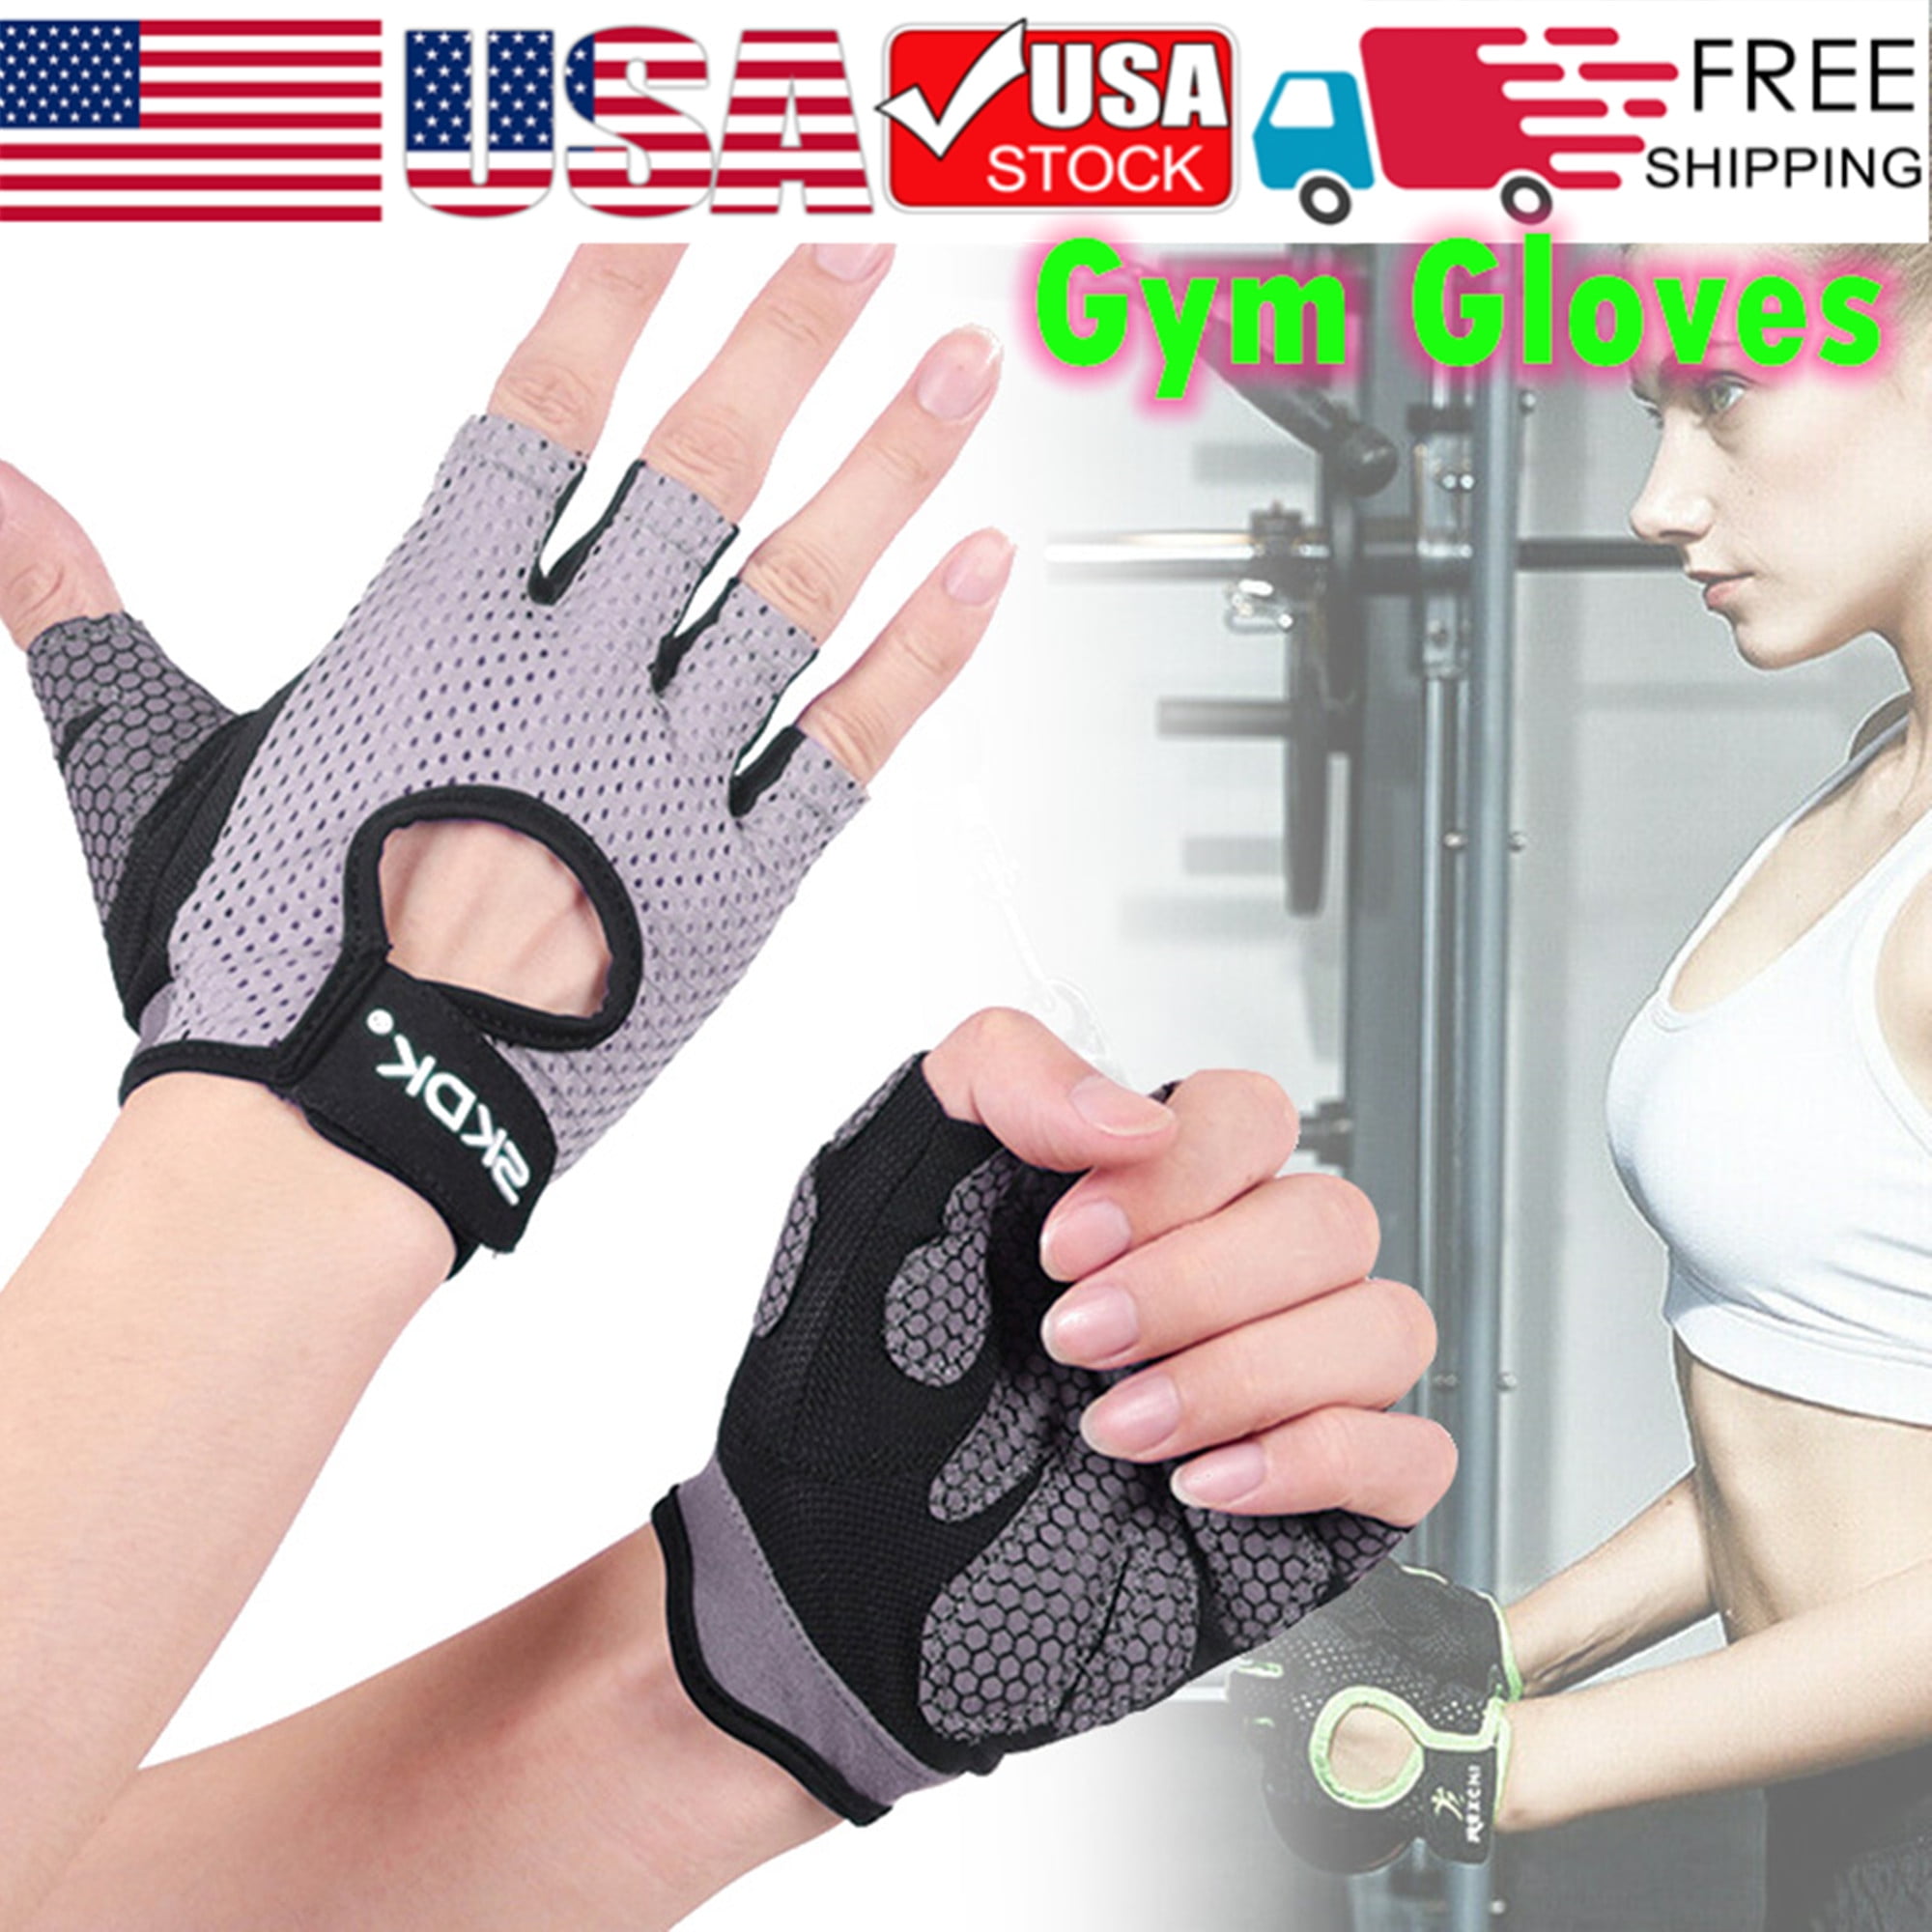 Details about   SPORTS Exercise Gloves Weight Lifting Gym Training Workout Wrist Wrap 